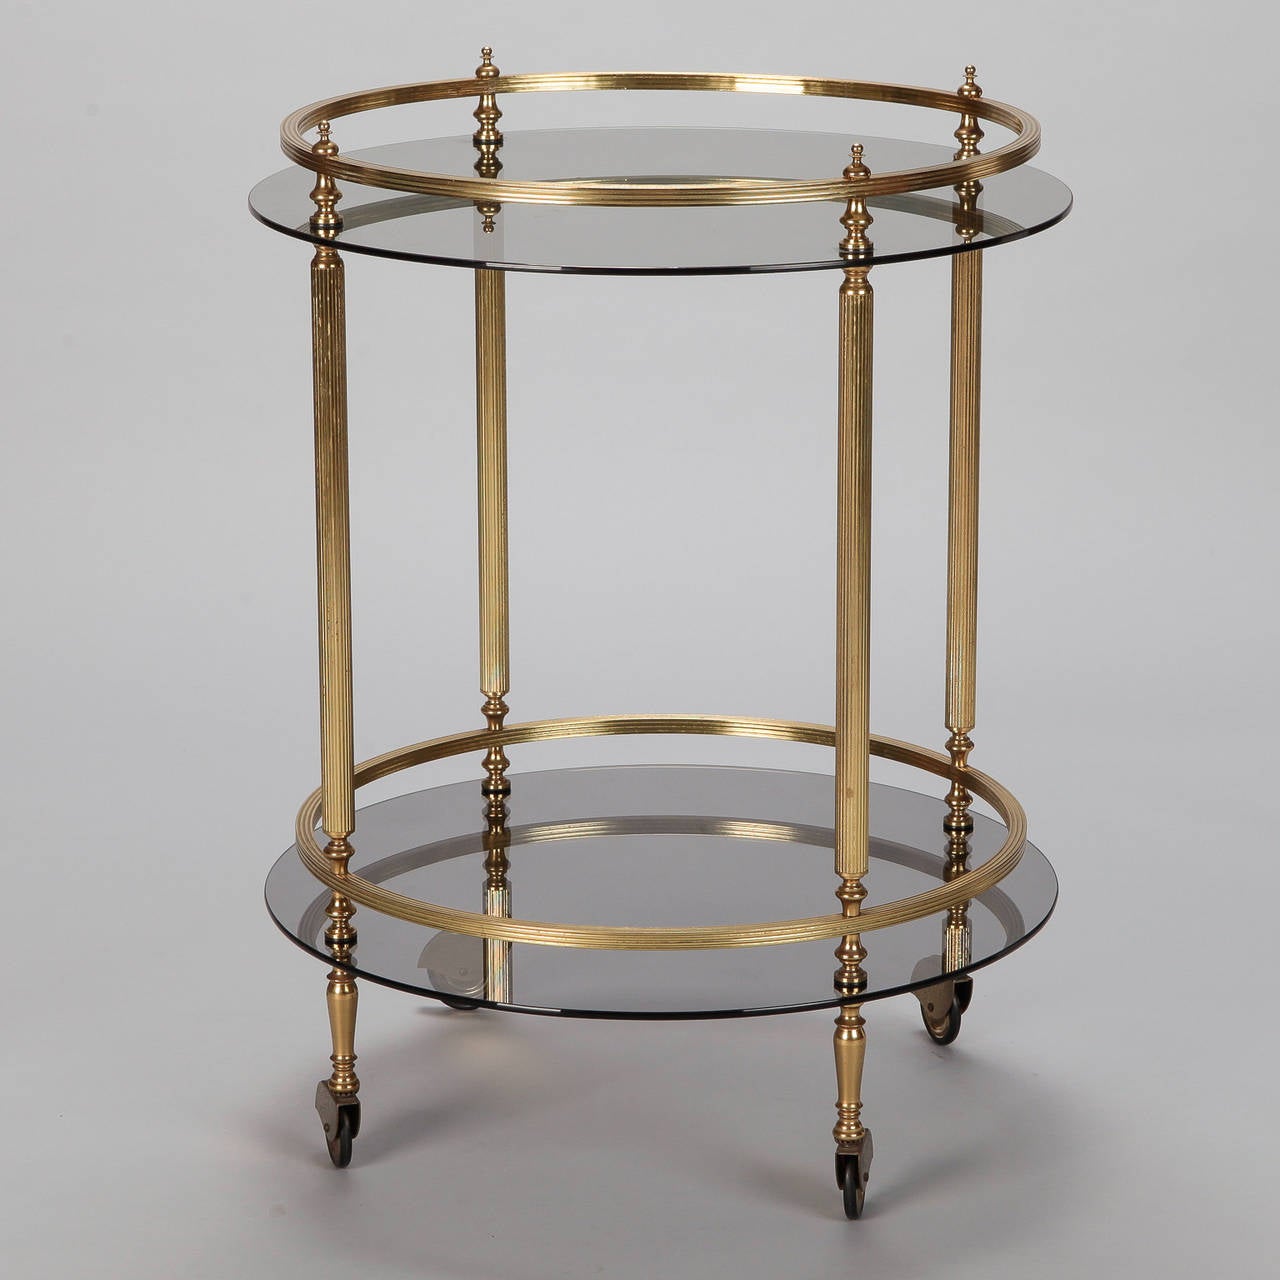 Circa 1960s two tier drinks trolley / server has a brass frame with round, smoked glass tops. Brass casters, brass legs and rails are reeded and topped with finials for a timeless, neoclassical look.